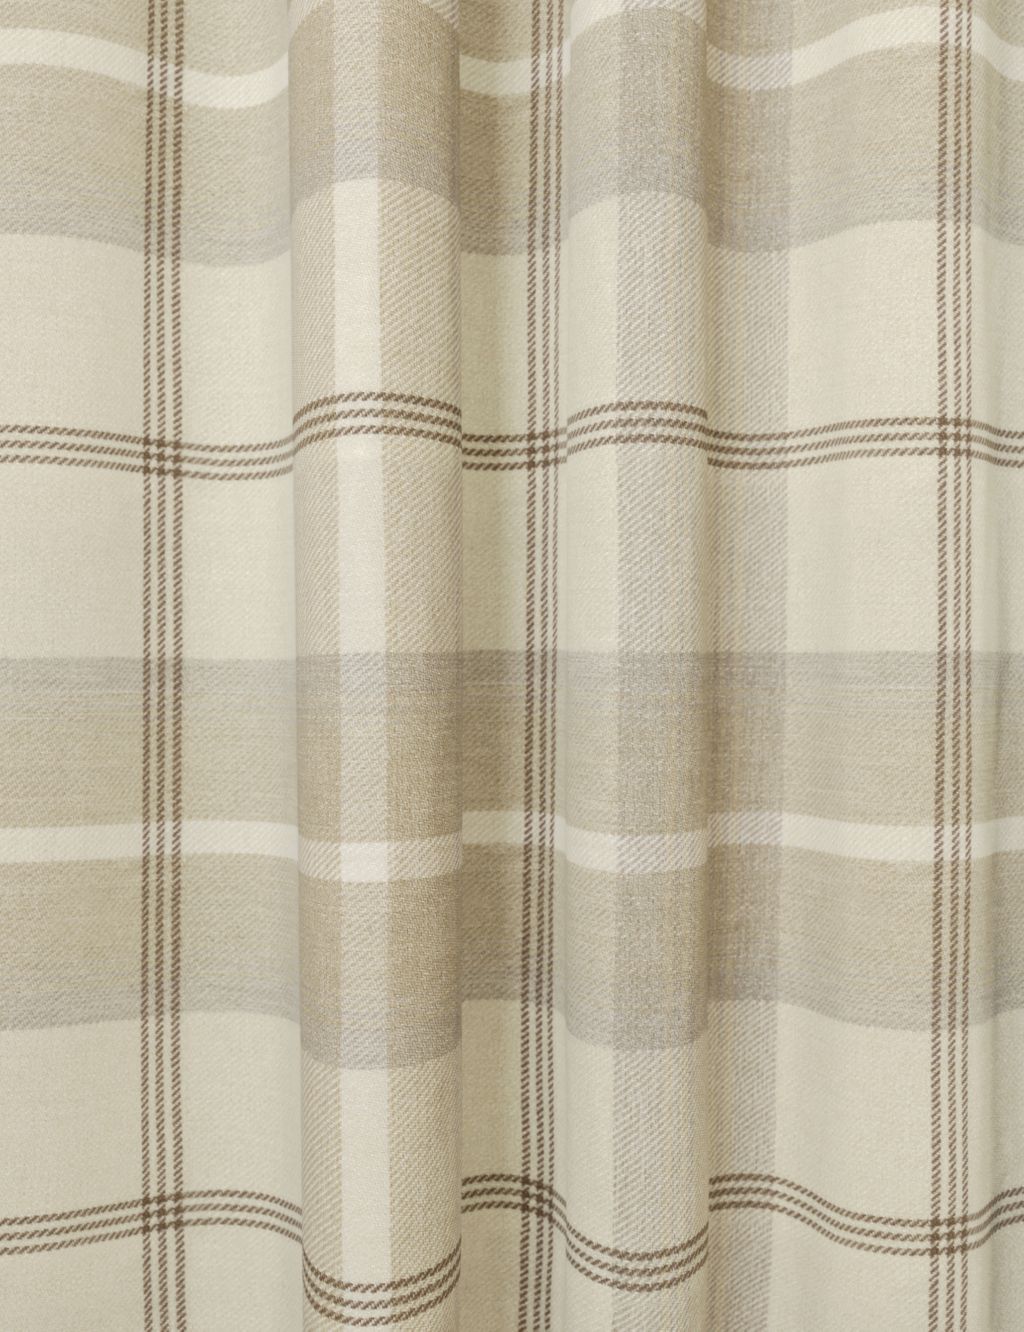 Brushed Woven Checked Pencil Pleat Curtains image 2